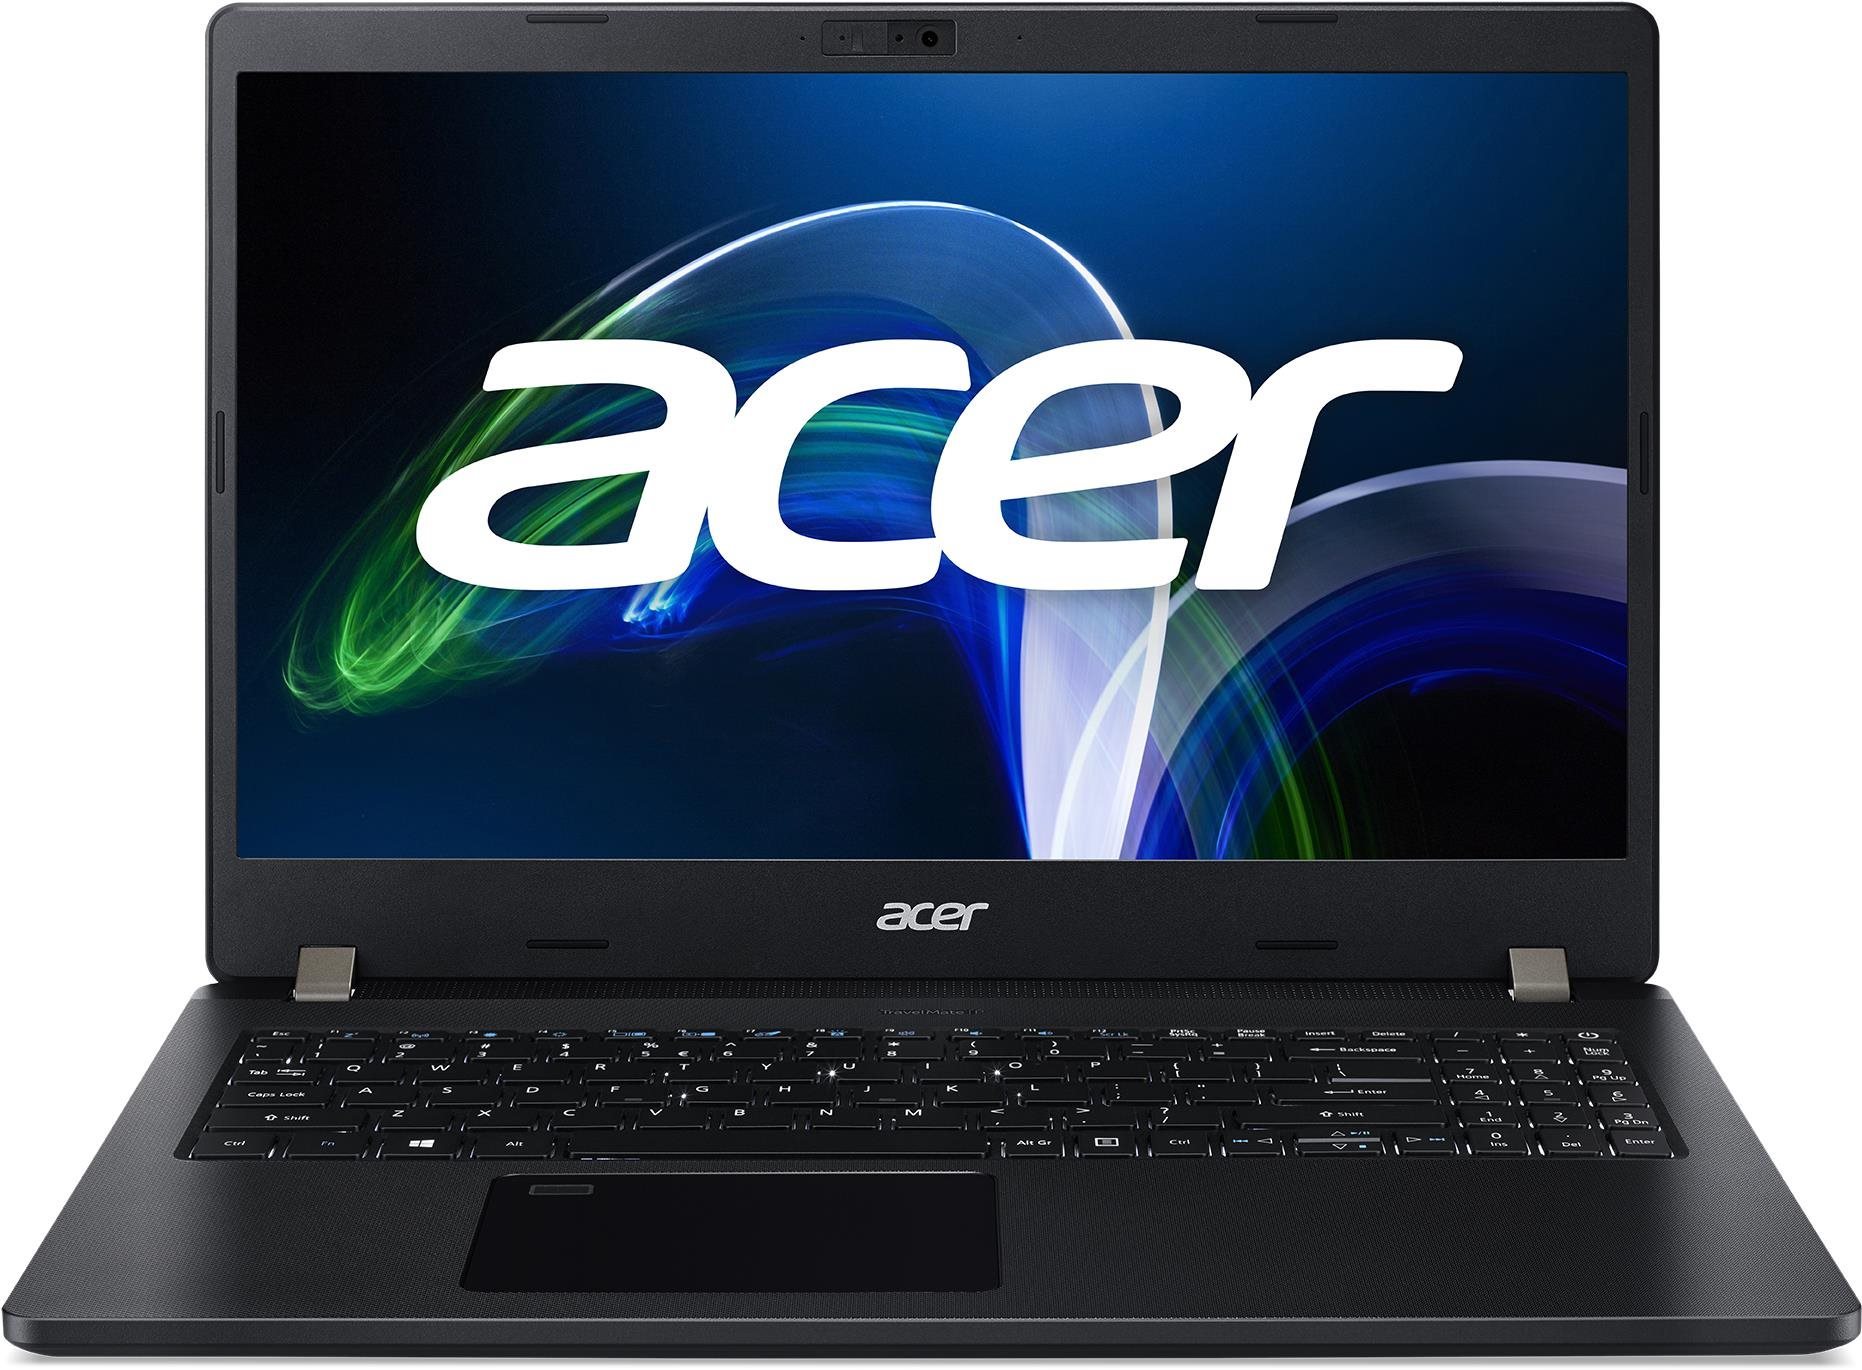 Laptop Acer Travelmate TMP215-41-G3-R4MA Fekete